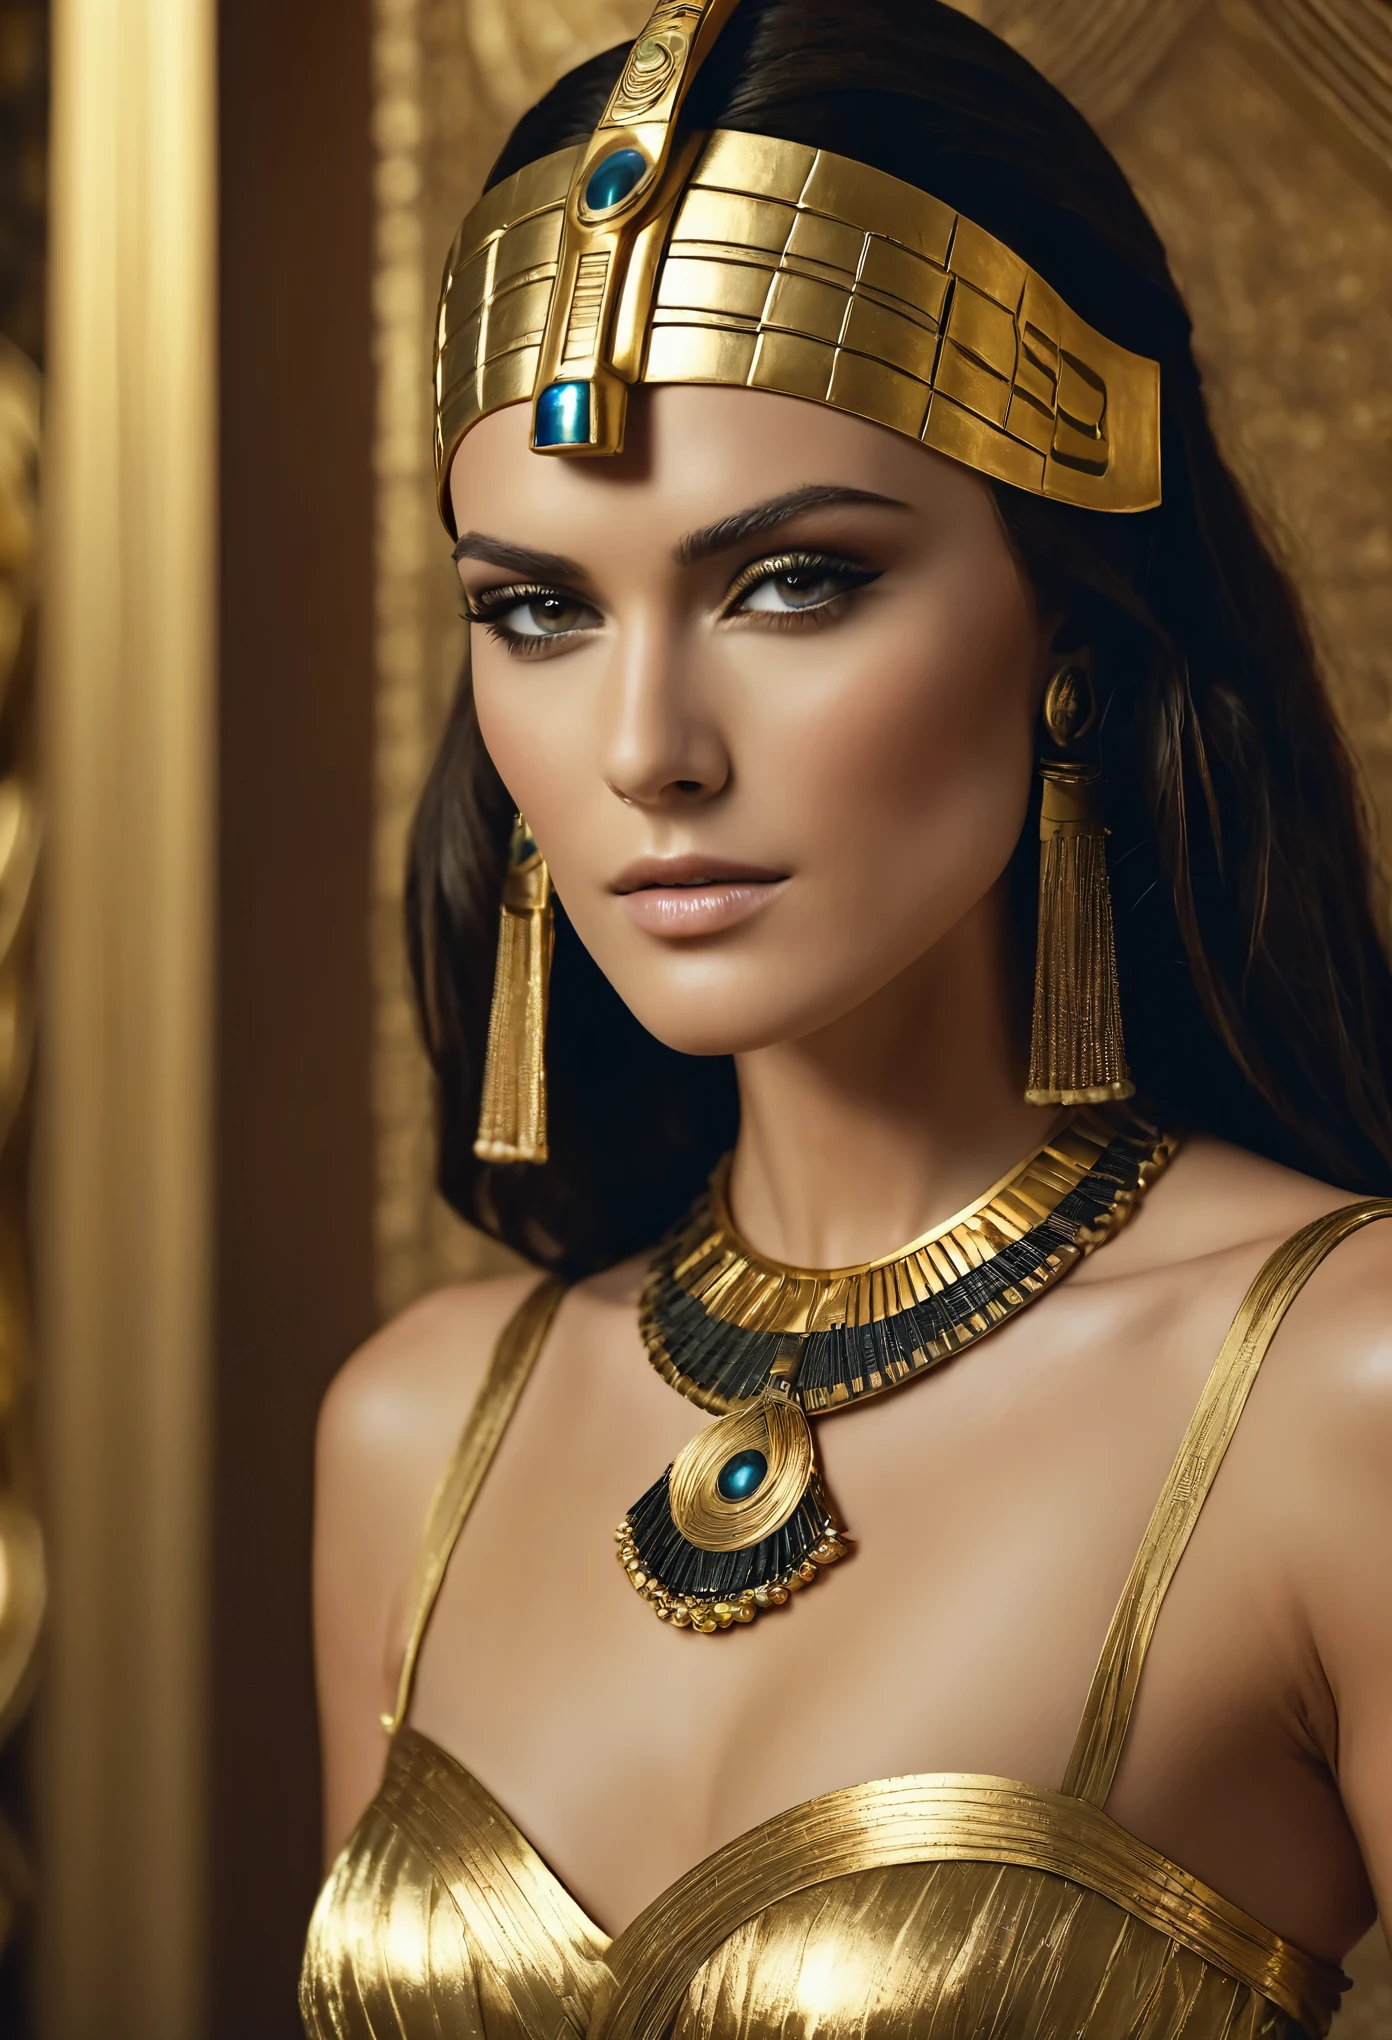 Gorgeous cleopatra, provoking figure, attractive figure, erotic and sensual Egyptian costumes, insane details, thick attractive figure, bulky figure, egyptian princess, cinematic goddess close shot, cleopatra, extremely beautiful lady, cinematic goddess body shot, cleopatra portrait, goddess, stunning beauty, extremely high detail, egyptian, cleopatra in her palace, cinematic goddess shot, egyptian style, extremely detailed goddess shot, beautiful goddess, cinematic portrait, professional cinematography, As an Egyptian, Keira Knightley Beautiful and stunning pharaoh Keira Knightley, portrait of Cleopatra, uhd, 8k, 32k, detailed, intricate, sharp Beauty, high definition, cinematic perspective, faultless image, background of ancient EgyptA close-up of a woman wearing a gold dress and an Egyptian mask, a cinematic portrait, expert cinematography, crazy details, an Egyptian princess, a close-up of a cinematic goddess, cleopatra, an incredibly beautiful lady, and a cinematic goddess body